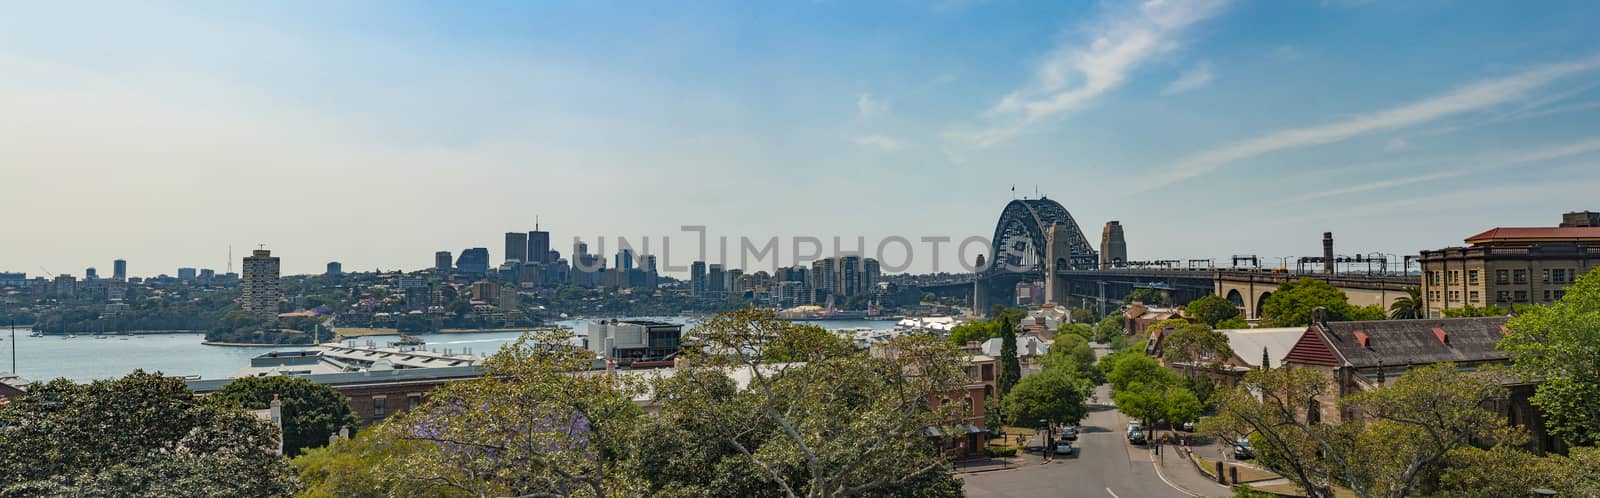 Sydney downtown and Harbour Bridge panorama by fyletto